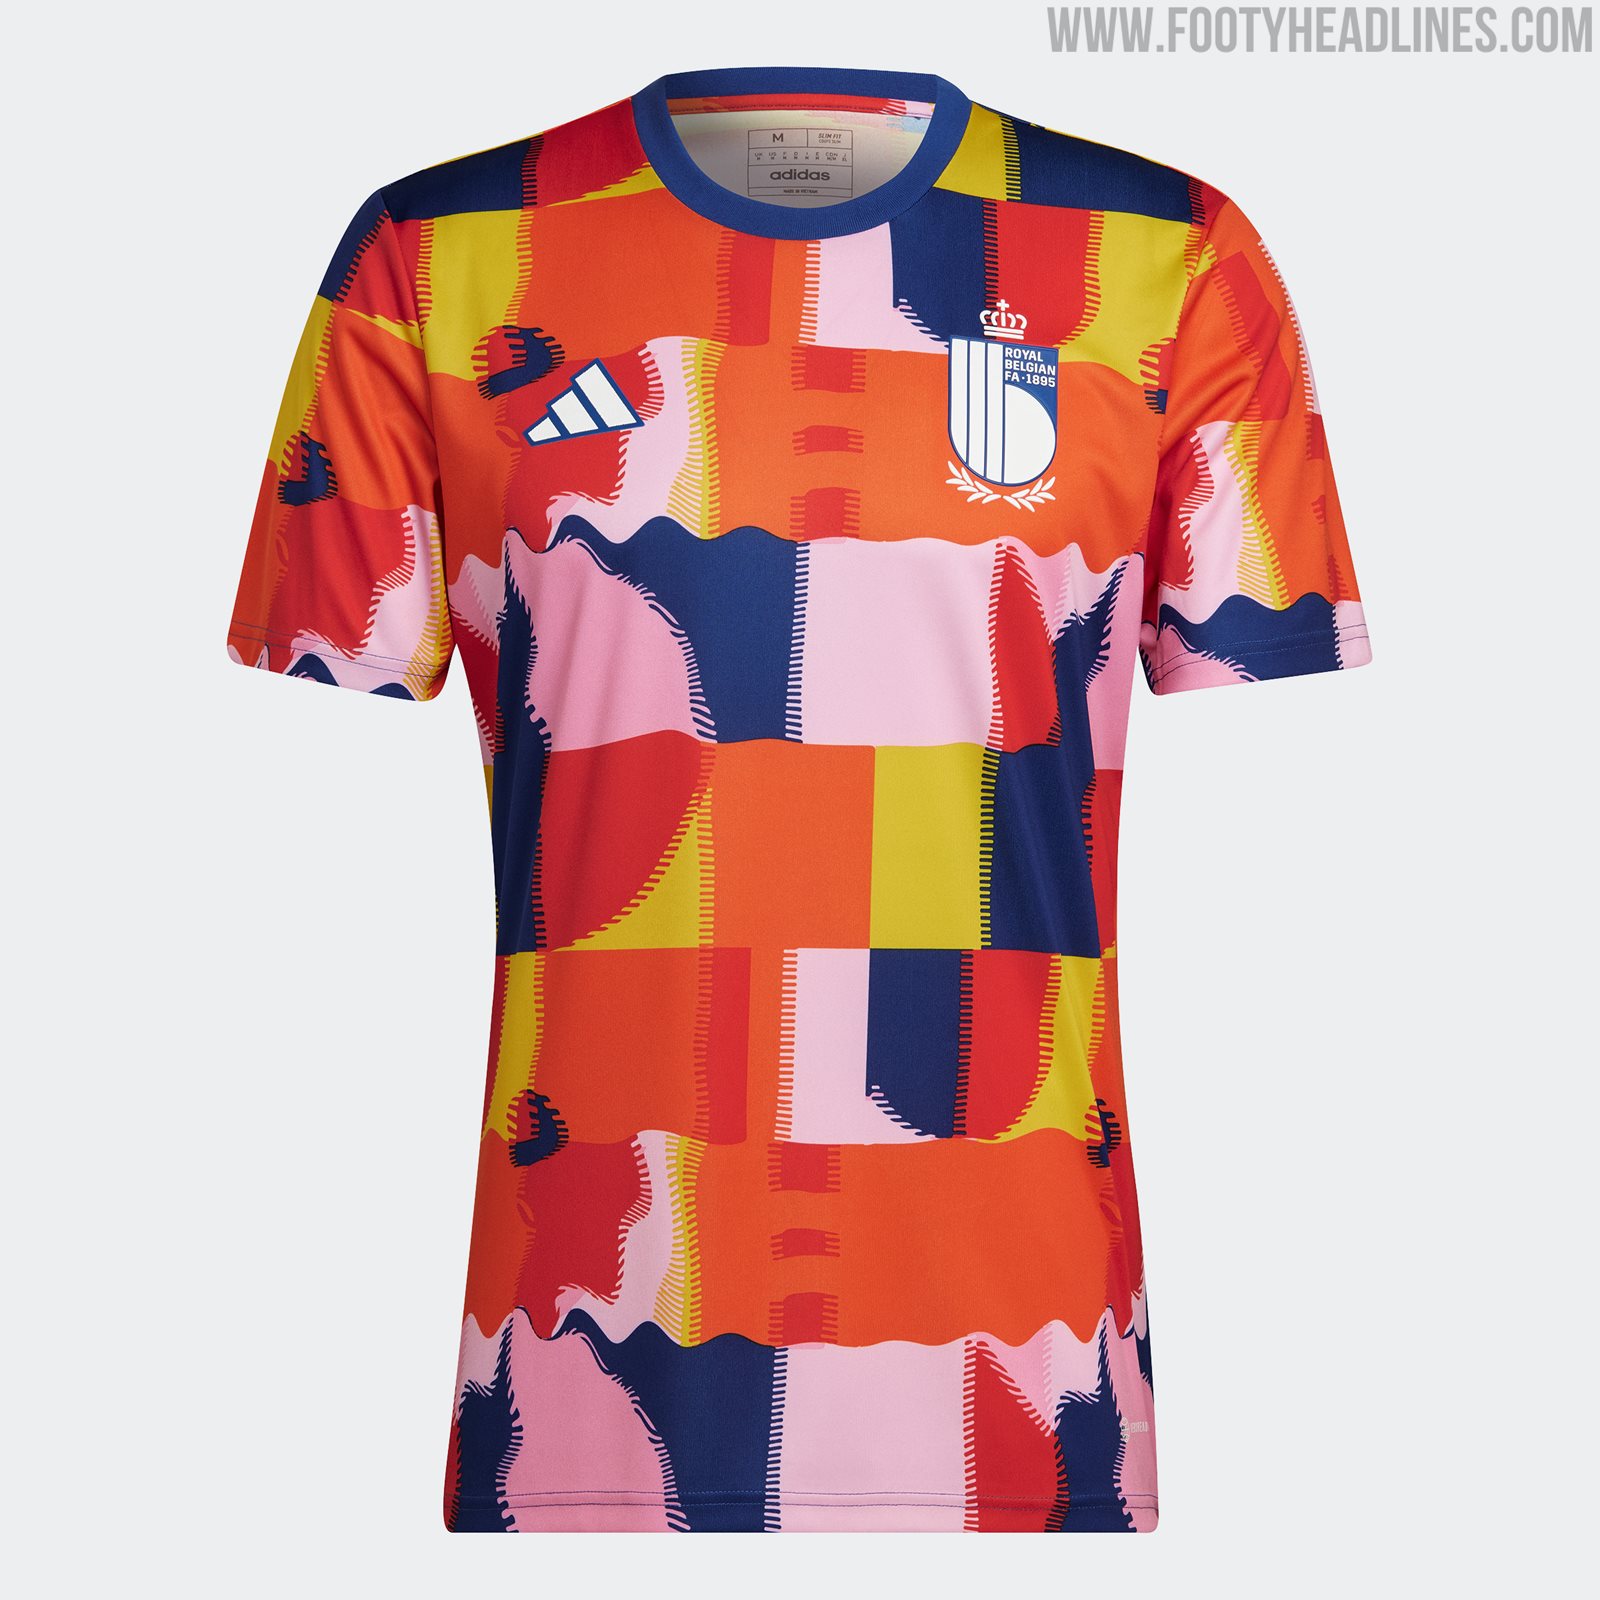 Belgian team will wear Tomorrowland's t-shirts for the FIFA World Cup